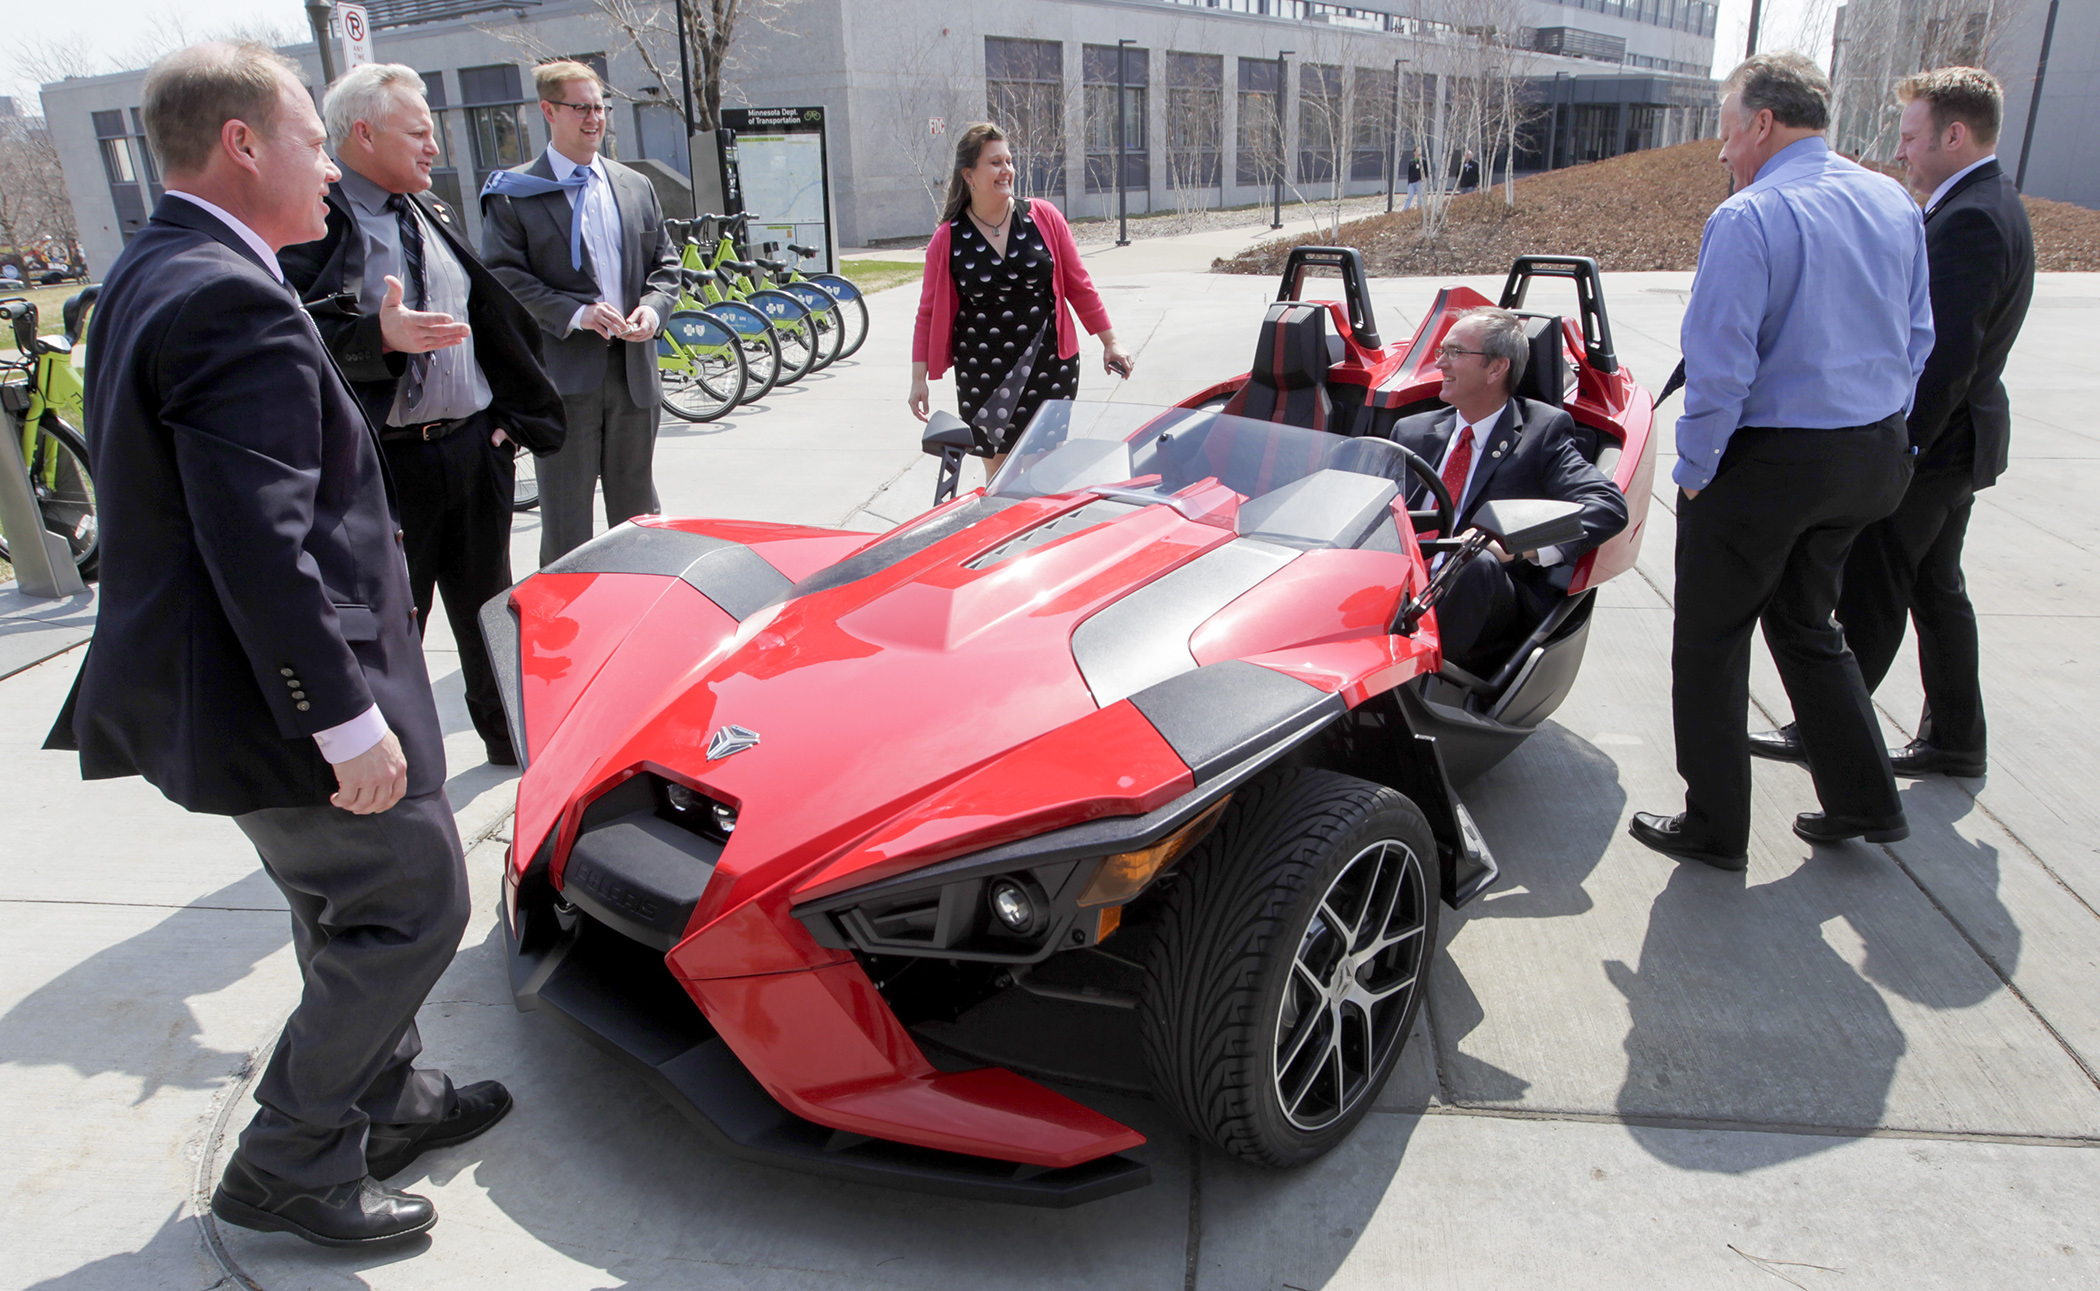 Rep. Dan Fabian sits in a Polaris Slingshot outside the State Office Building April 14 as Rep. Jason Rarick, from left, Rep. Steve Green, House Republican Researcher Harry Merickel, lobbyist Lynda Lisenby, Rep. Chad Anderson and Rep. Mark Uglem look on. Fabian sponsors HF3014 that would allow an “autocycle” to be operated without a motorcycle endorsement. Photo by Paul Battaglia